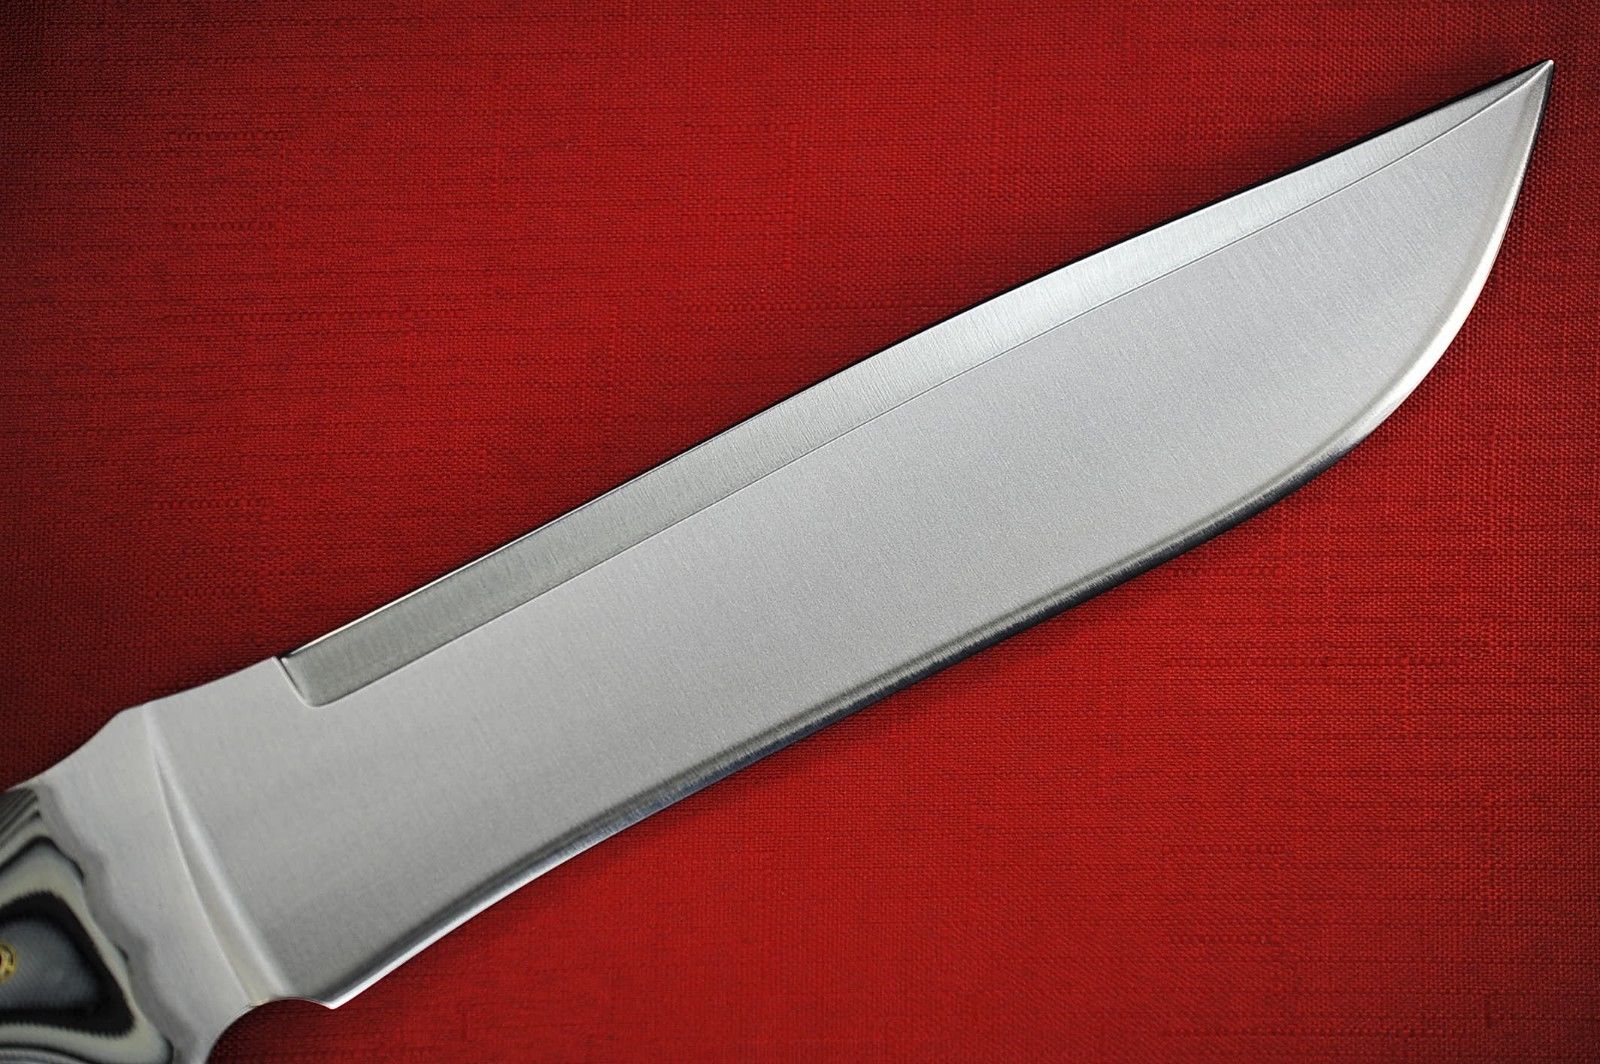 a large, metal knife with an blade on a red table cloth